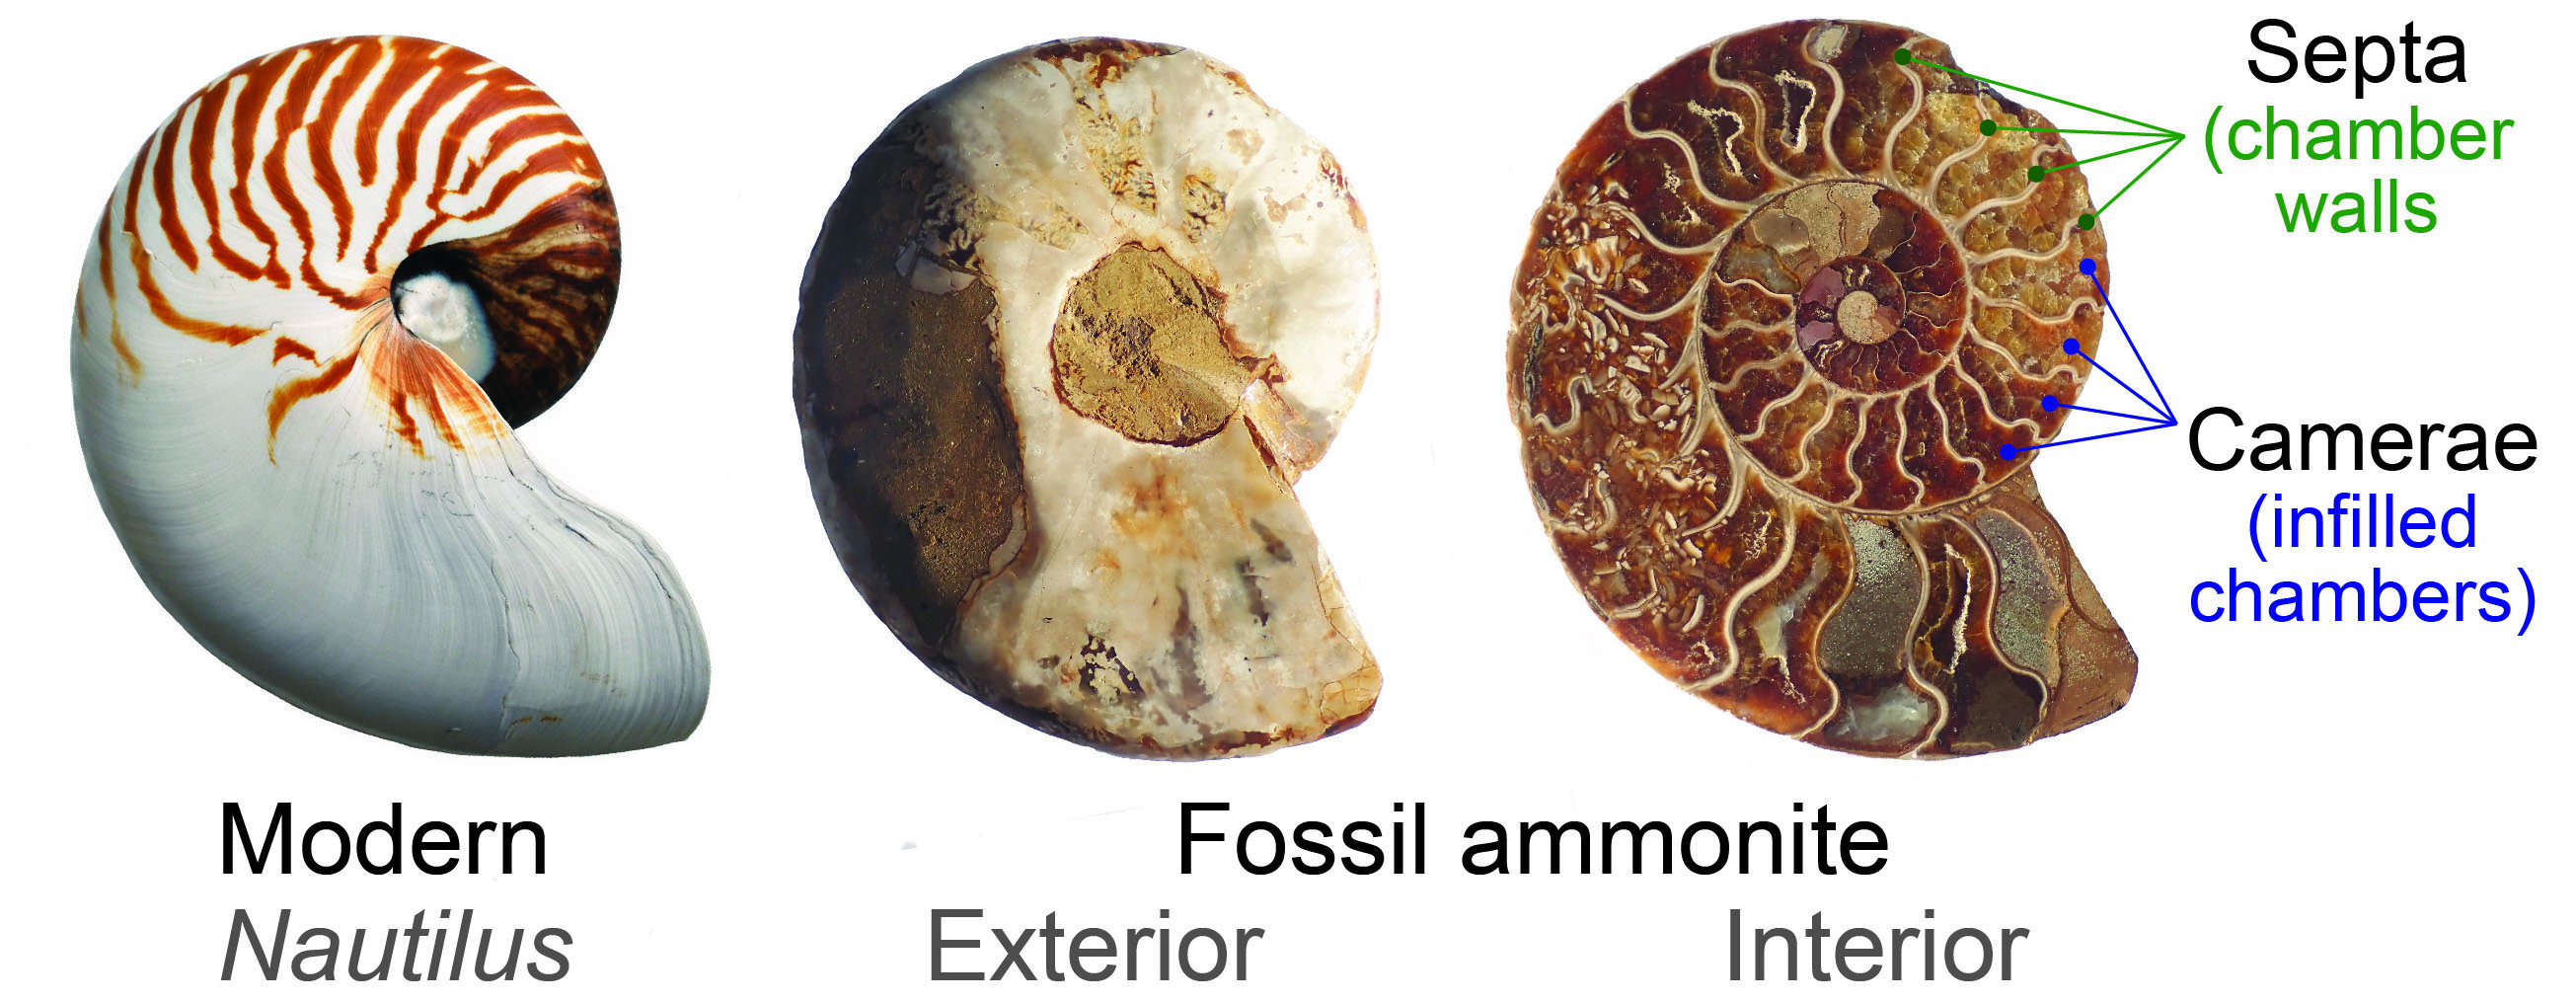 The interior of modern and fossil coiled cephalopods are divided into chambers (called camerae) by thin walls (called septae).